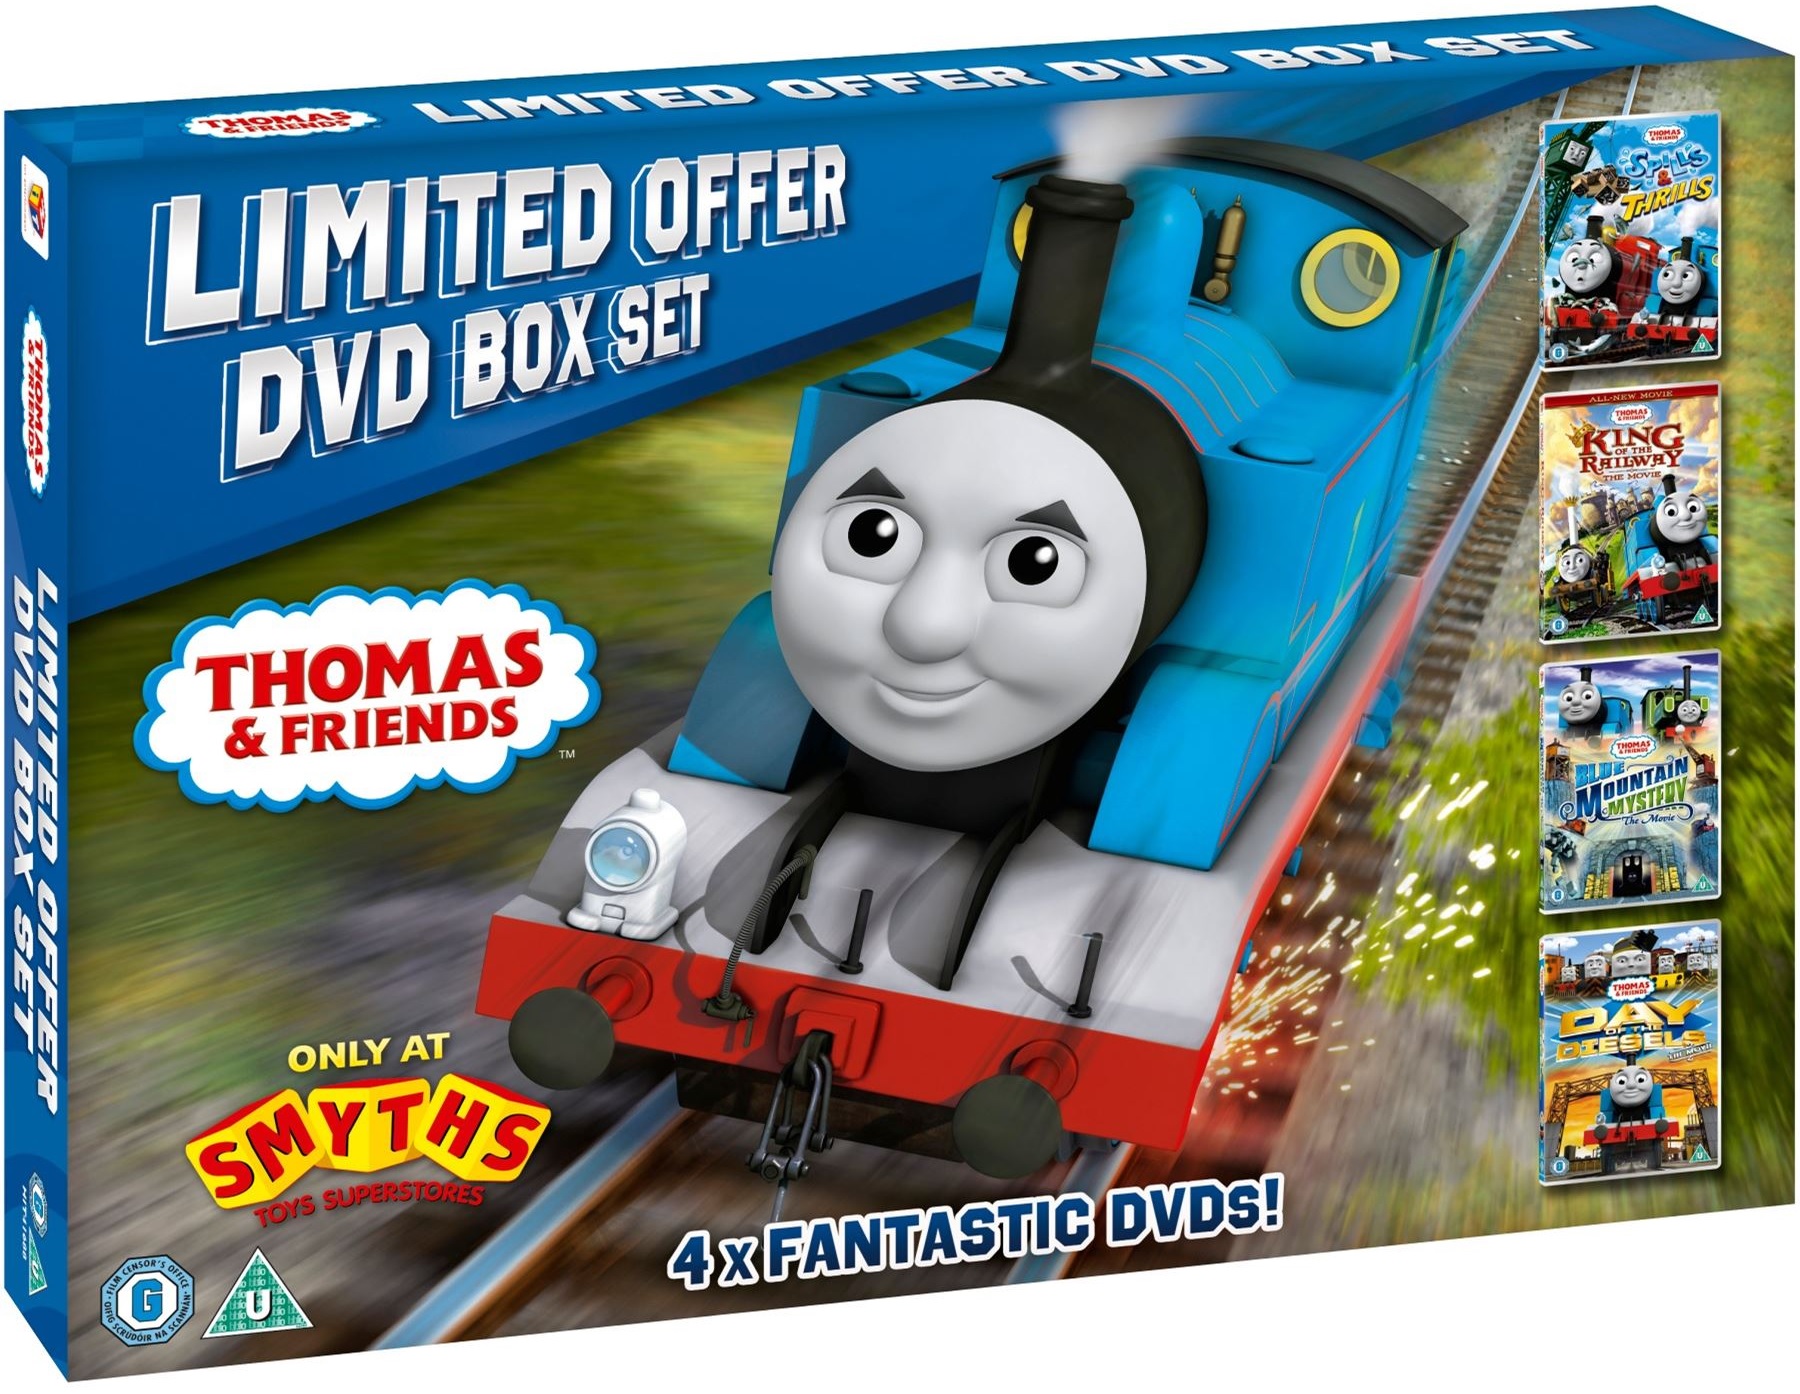 Limited Offer DVD Box Set, Thomas the Tank Engine Wikia